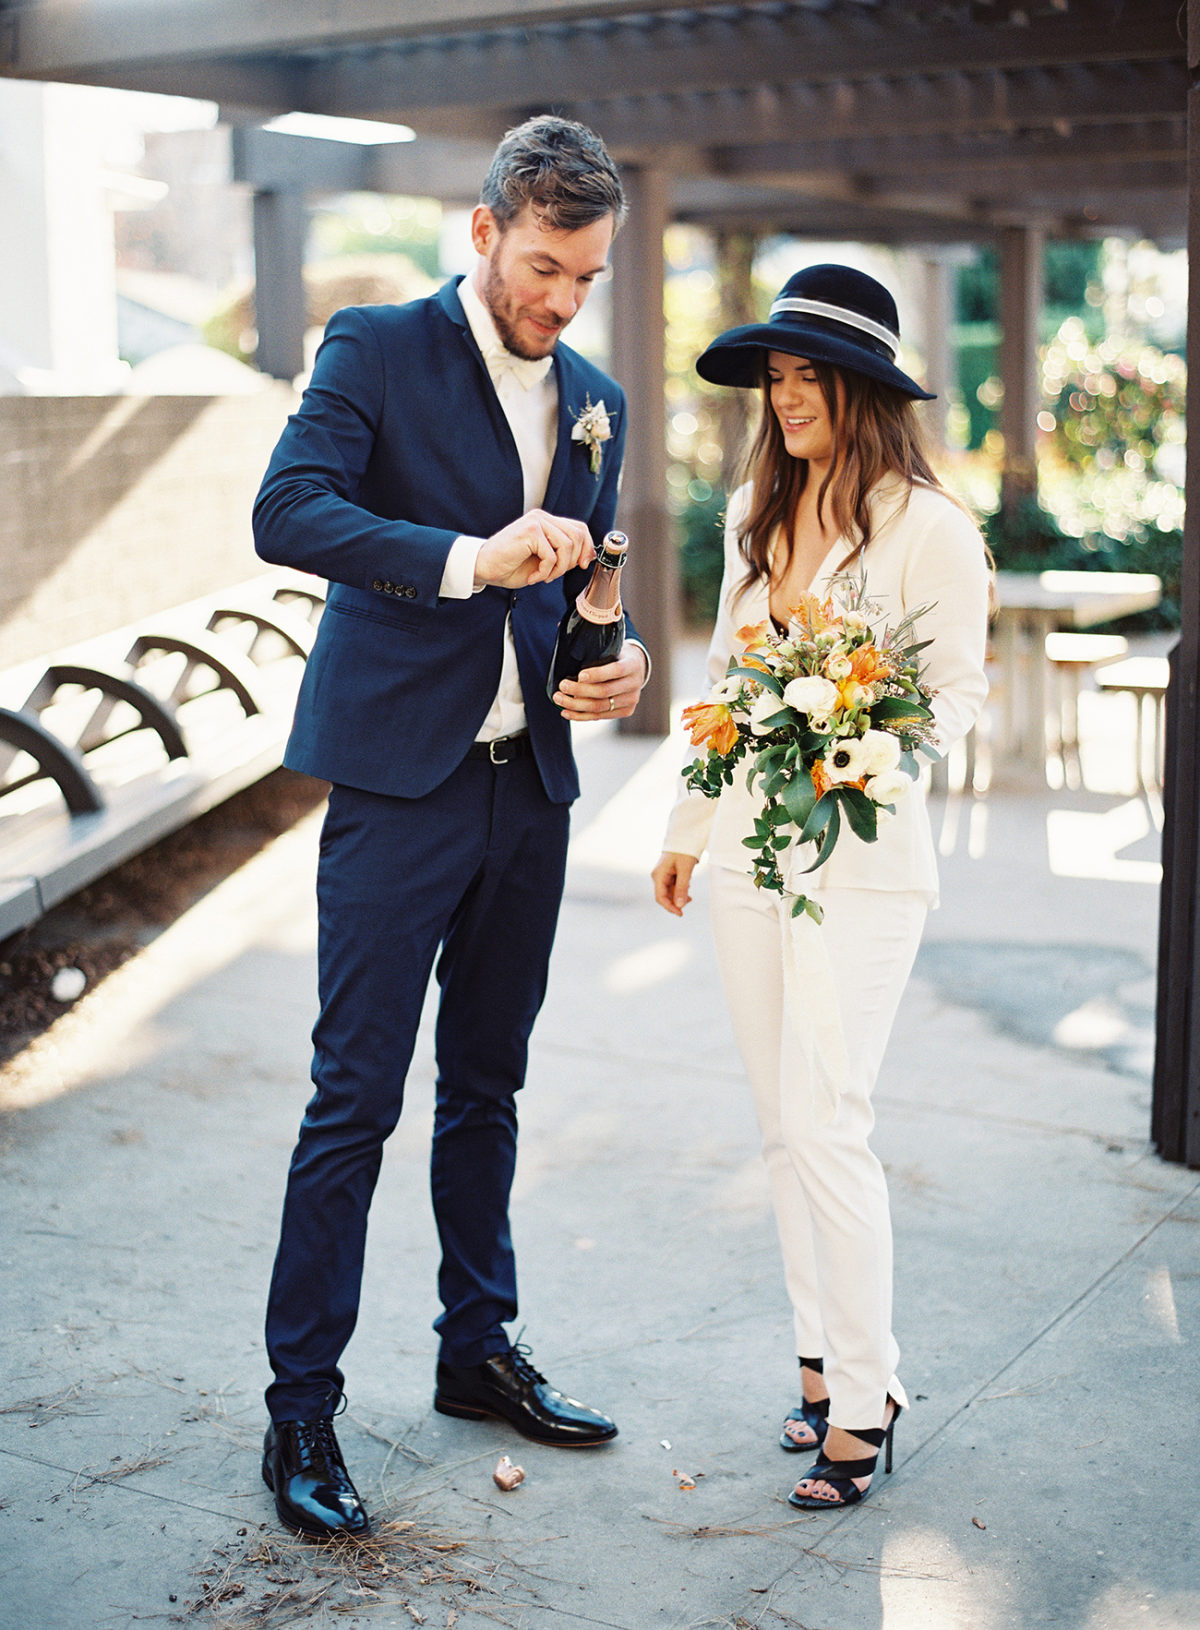 Gorgeous non-traditional modern bride and groom outfit for a courthouse celebration. Bride is wearing white blazer and pants, complimented with black heels and a statement hat. // See more: 20 Stunning Civil Wedding Outfit Ideas to Make it Official In Style. // mysweetengagement.com